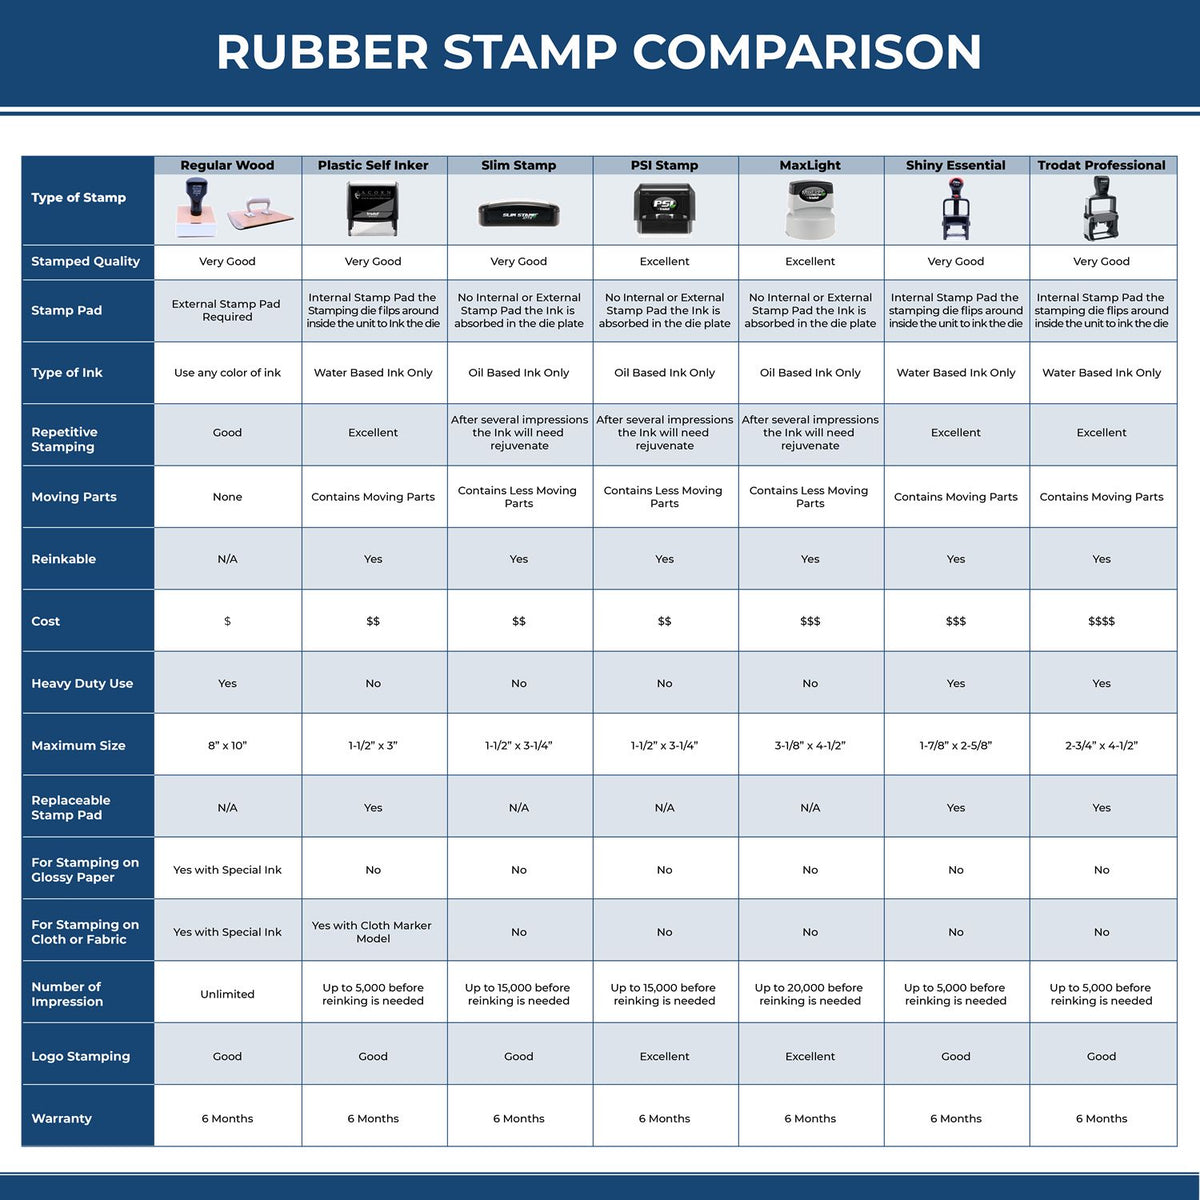 Large Self Inking Please Sign Return Stamp 4644S Rubber Stamp Comparison